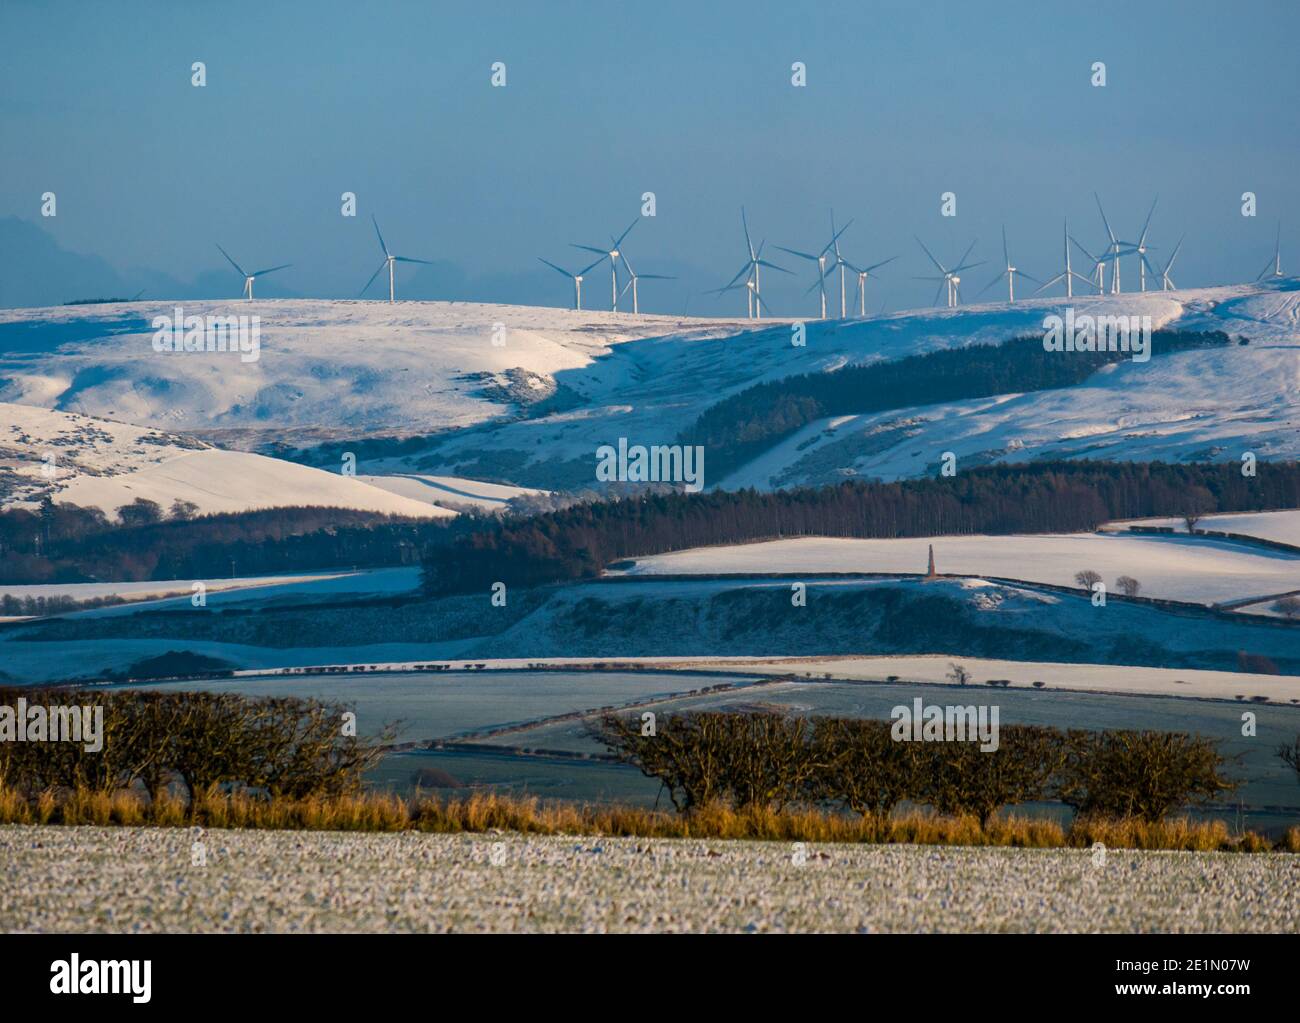 East Lothian, Scotland, United Kingdom, 8th January 2021. UK Weather: snow covers most of the county from the Garleton Hills southwards to the Lammermuir Hills on a bright clear sunny day with wind turbines clearly visible in the distance Stock Photo